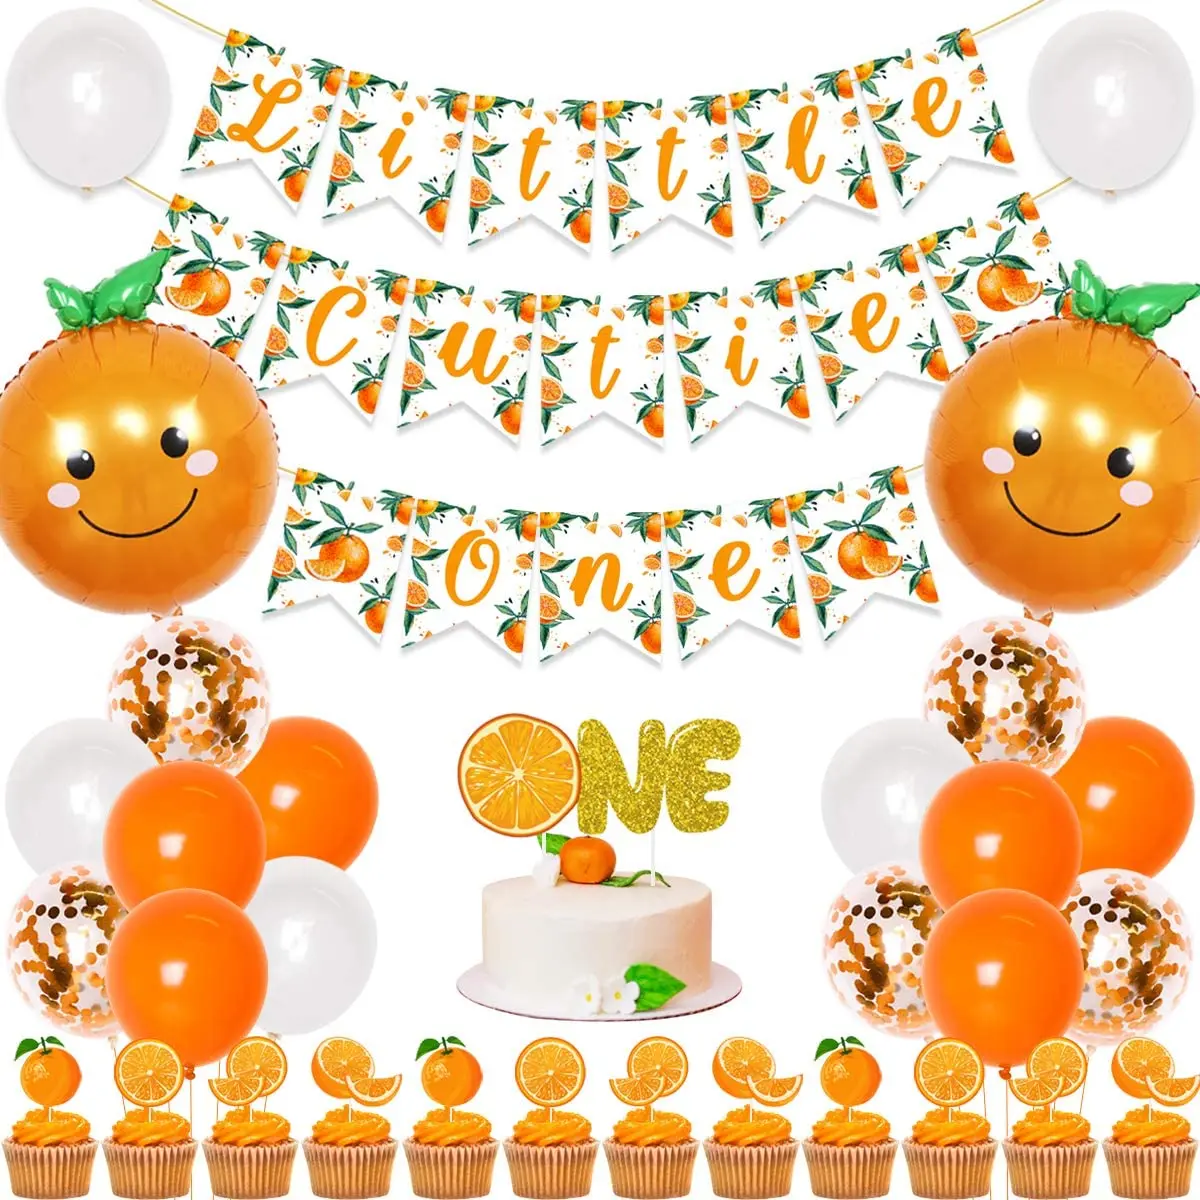 

Baby Shower Party Decorations Little Cutie Banner Orange Cupcake Toppers Balloons for Tangerine Theme Birthday Party Supplies